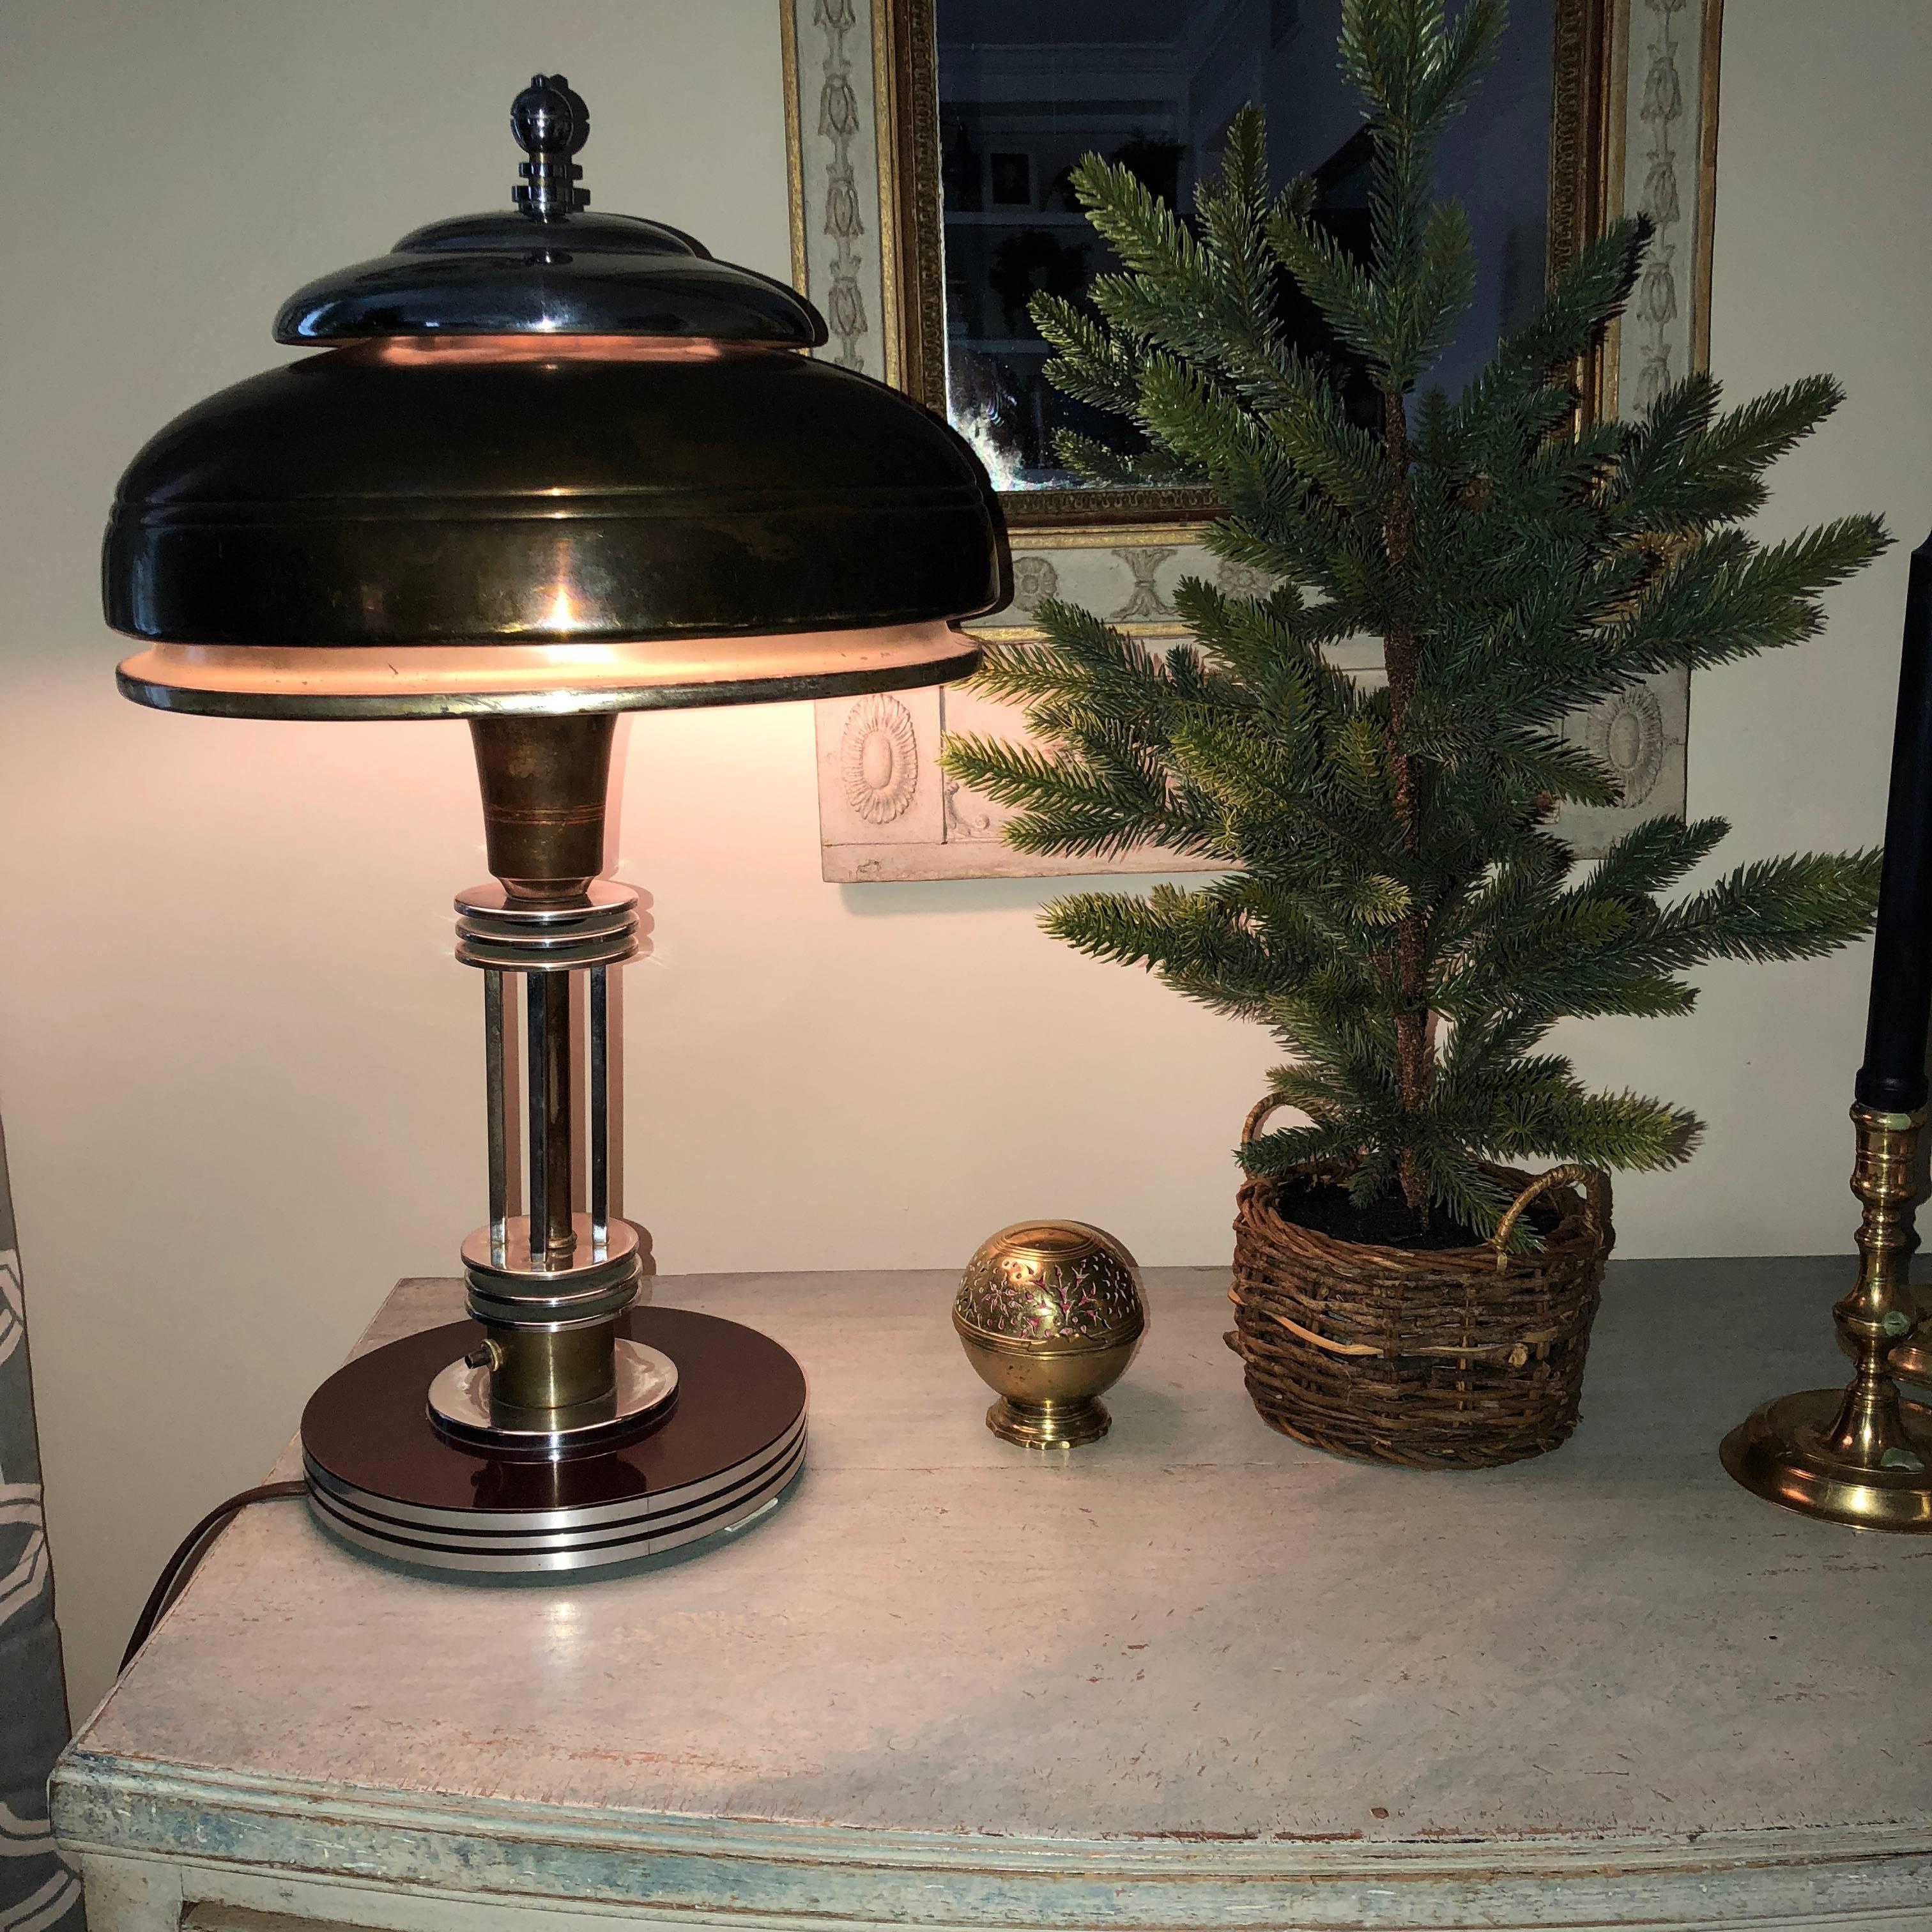 Early American Art Deco Desk or Table Lamp 4